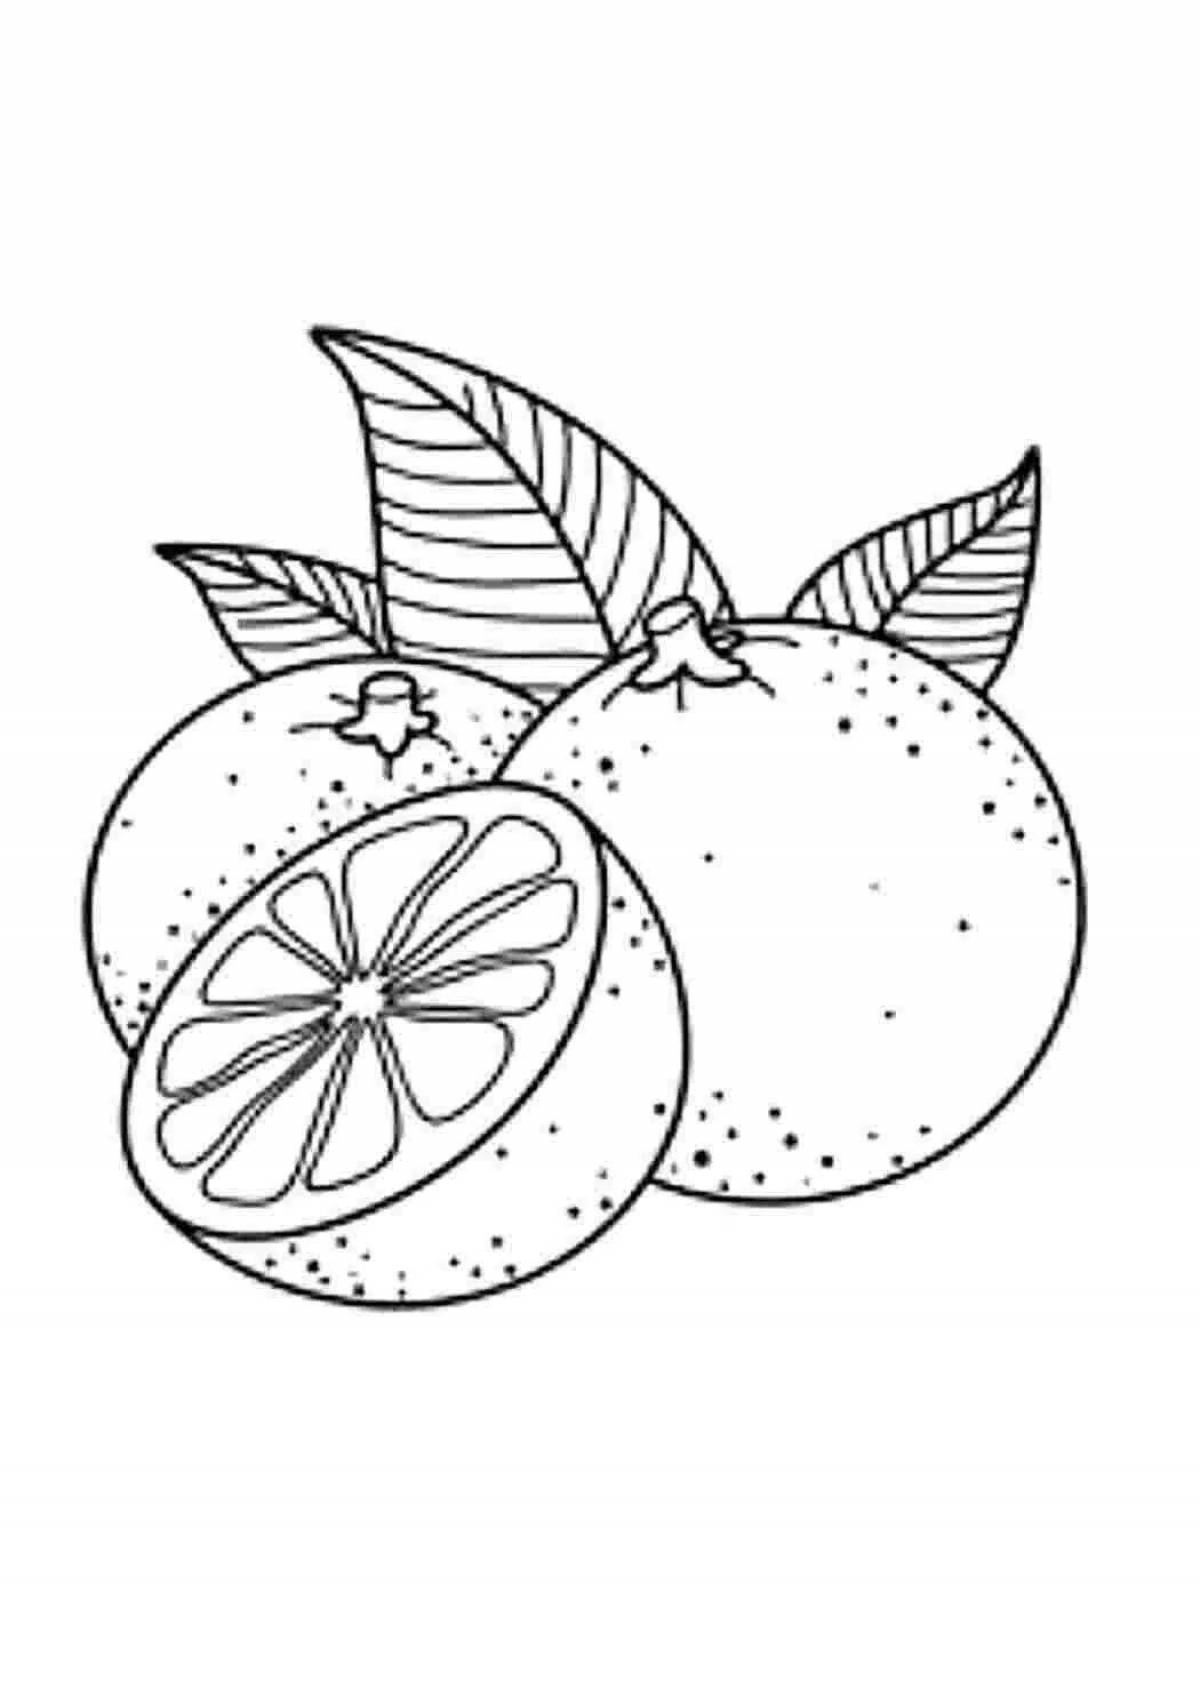 A fun coloring book with tangerines for kids